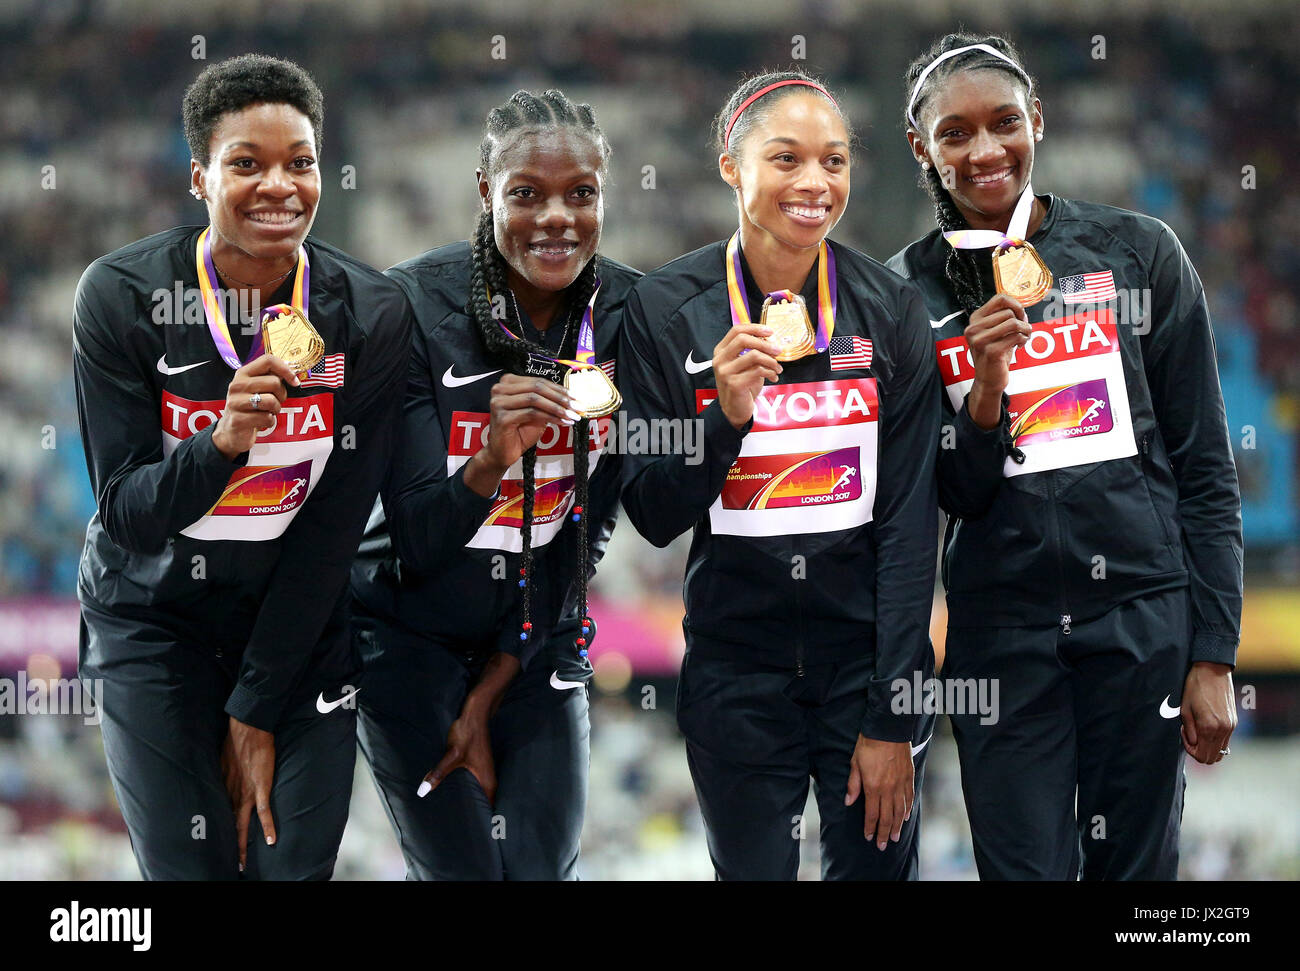 Womens Relay Team High Resolution Stock Photography and Images - Alamy